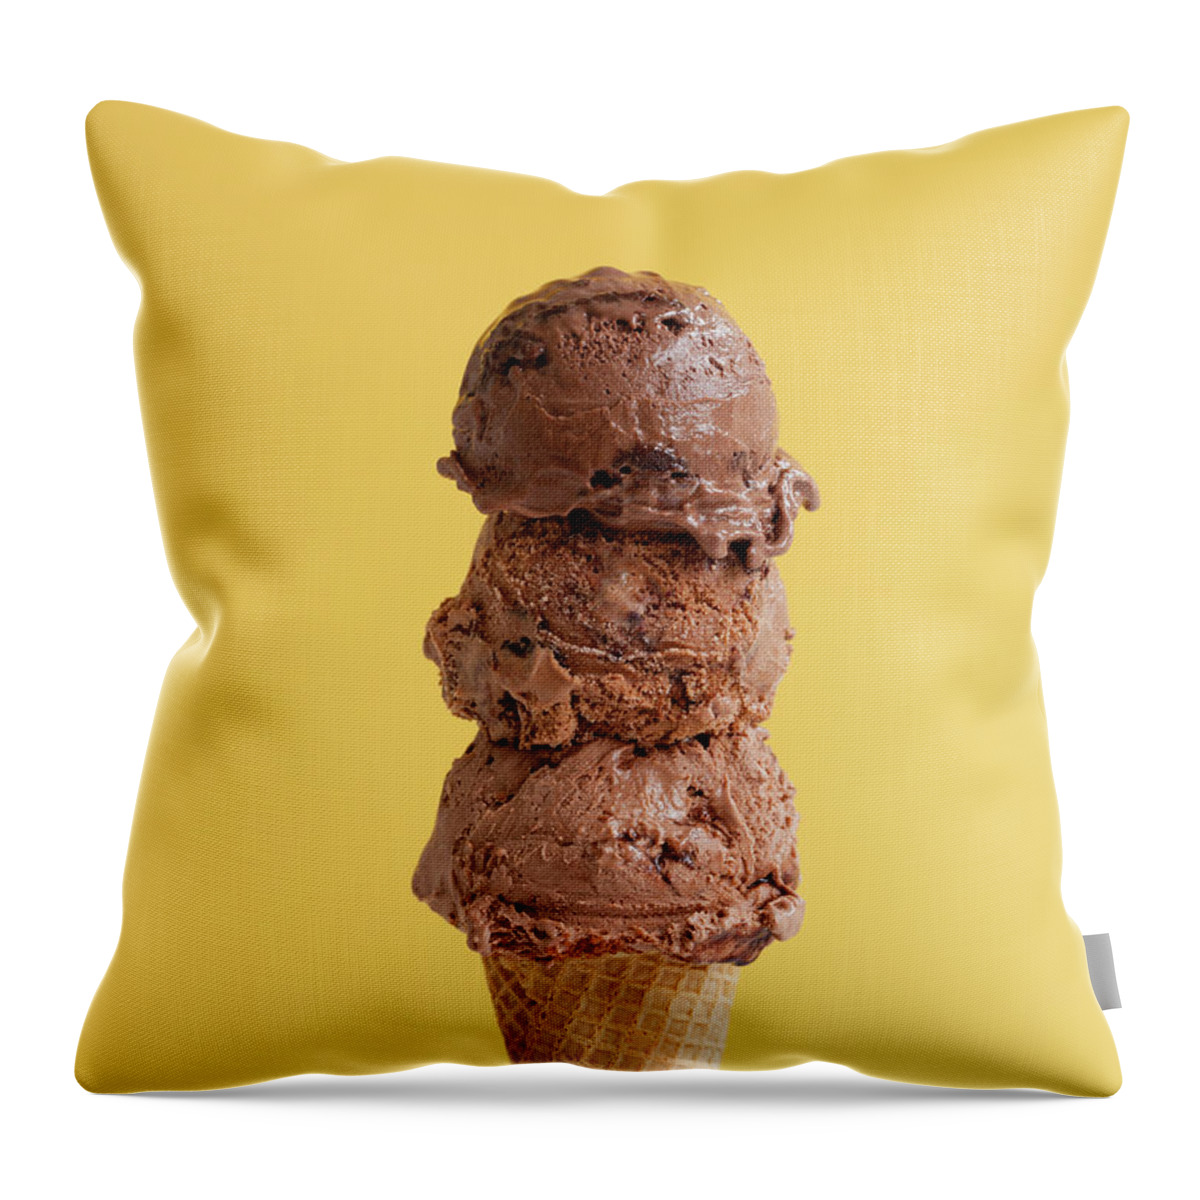 Unhealthy Eating Throw Pillow featuring the photograph Triple Scoop Chocolate Ice Cream by James Worrell